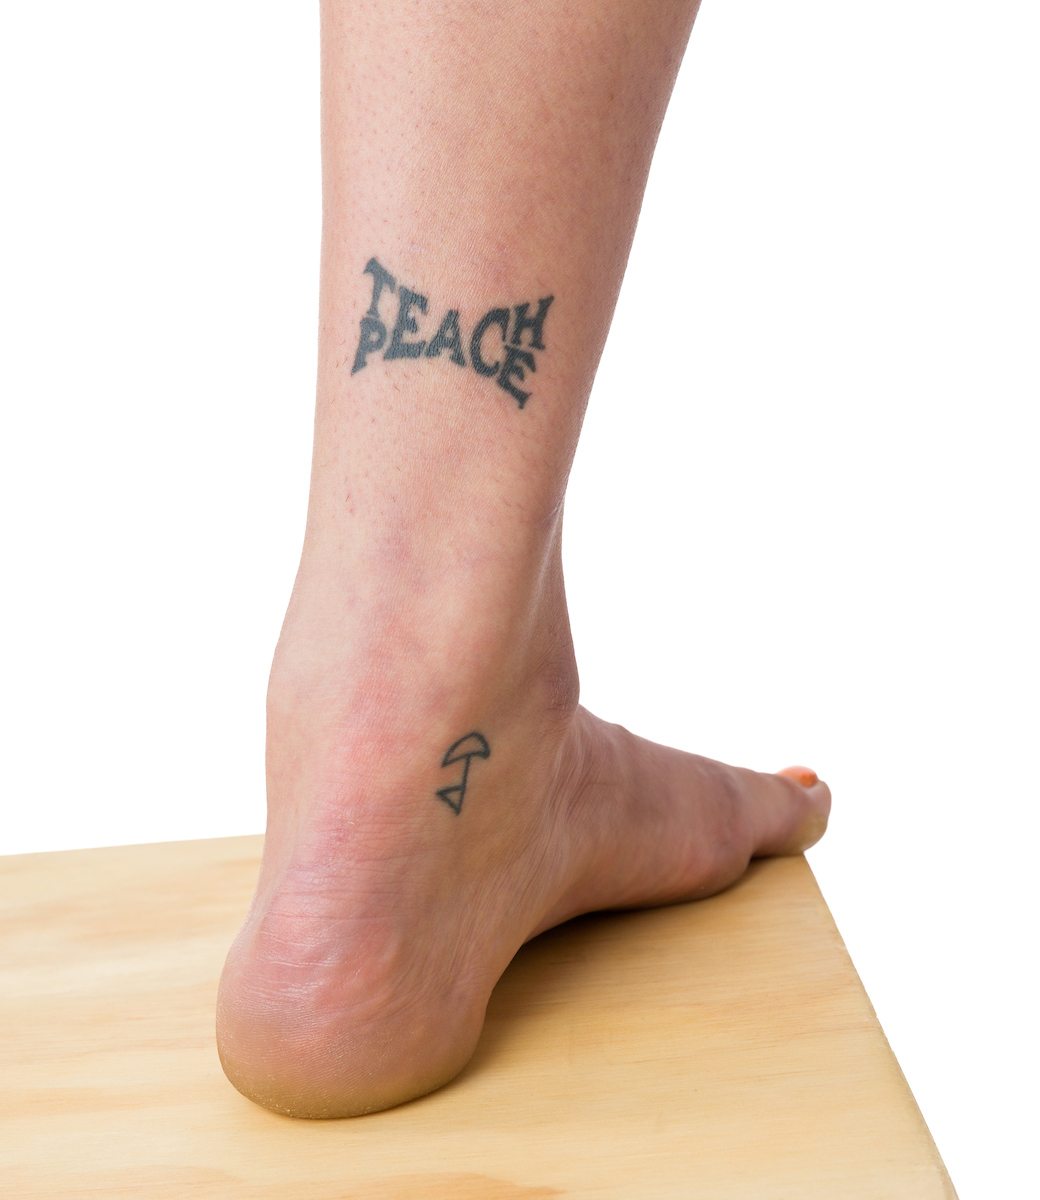 Geeky Ink: Students, Faculty and Staff Share Their Academically-Inspired  Tats | Cal Poly